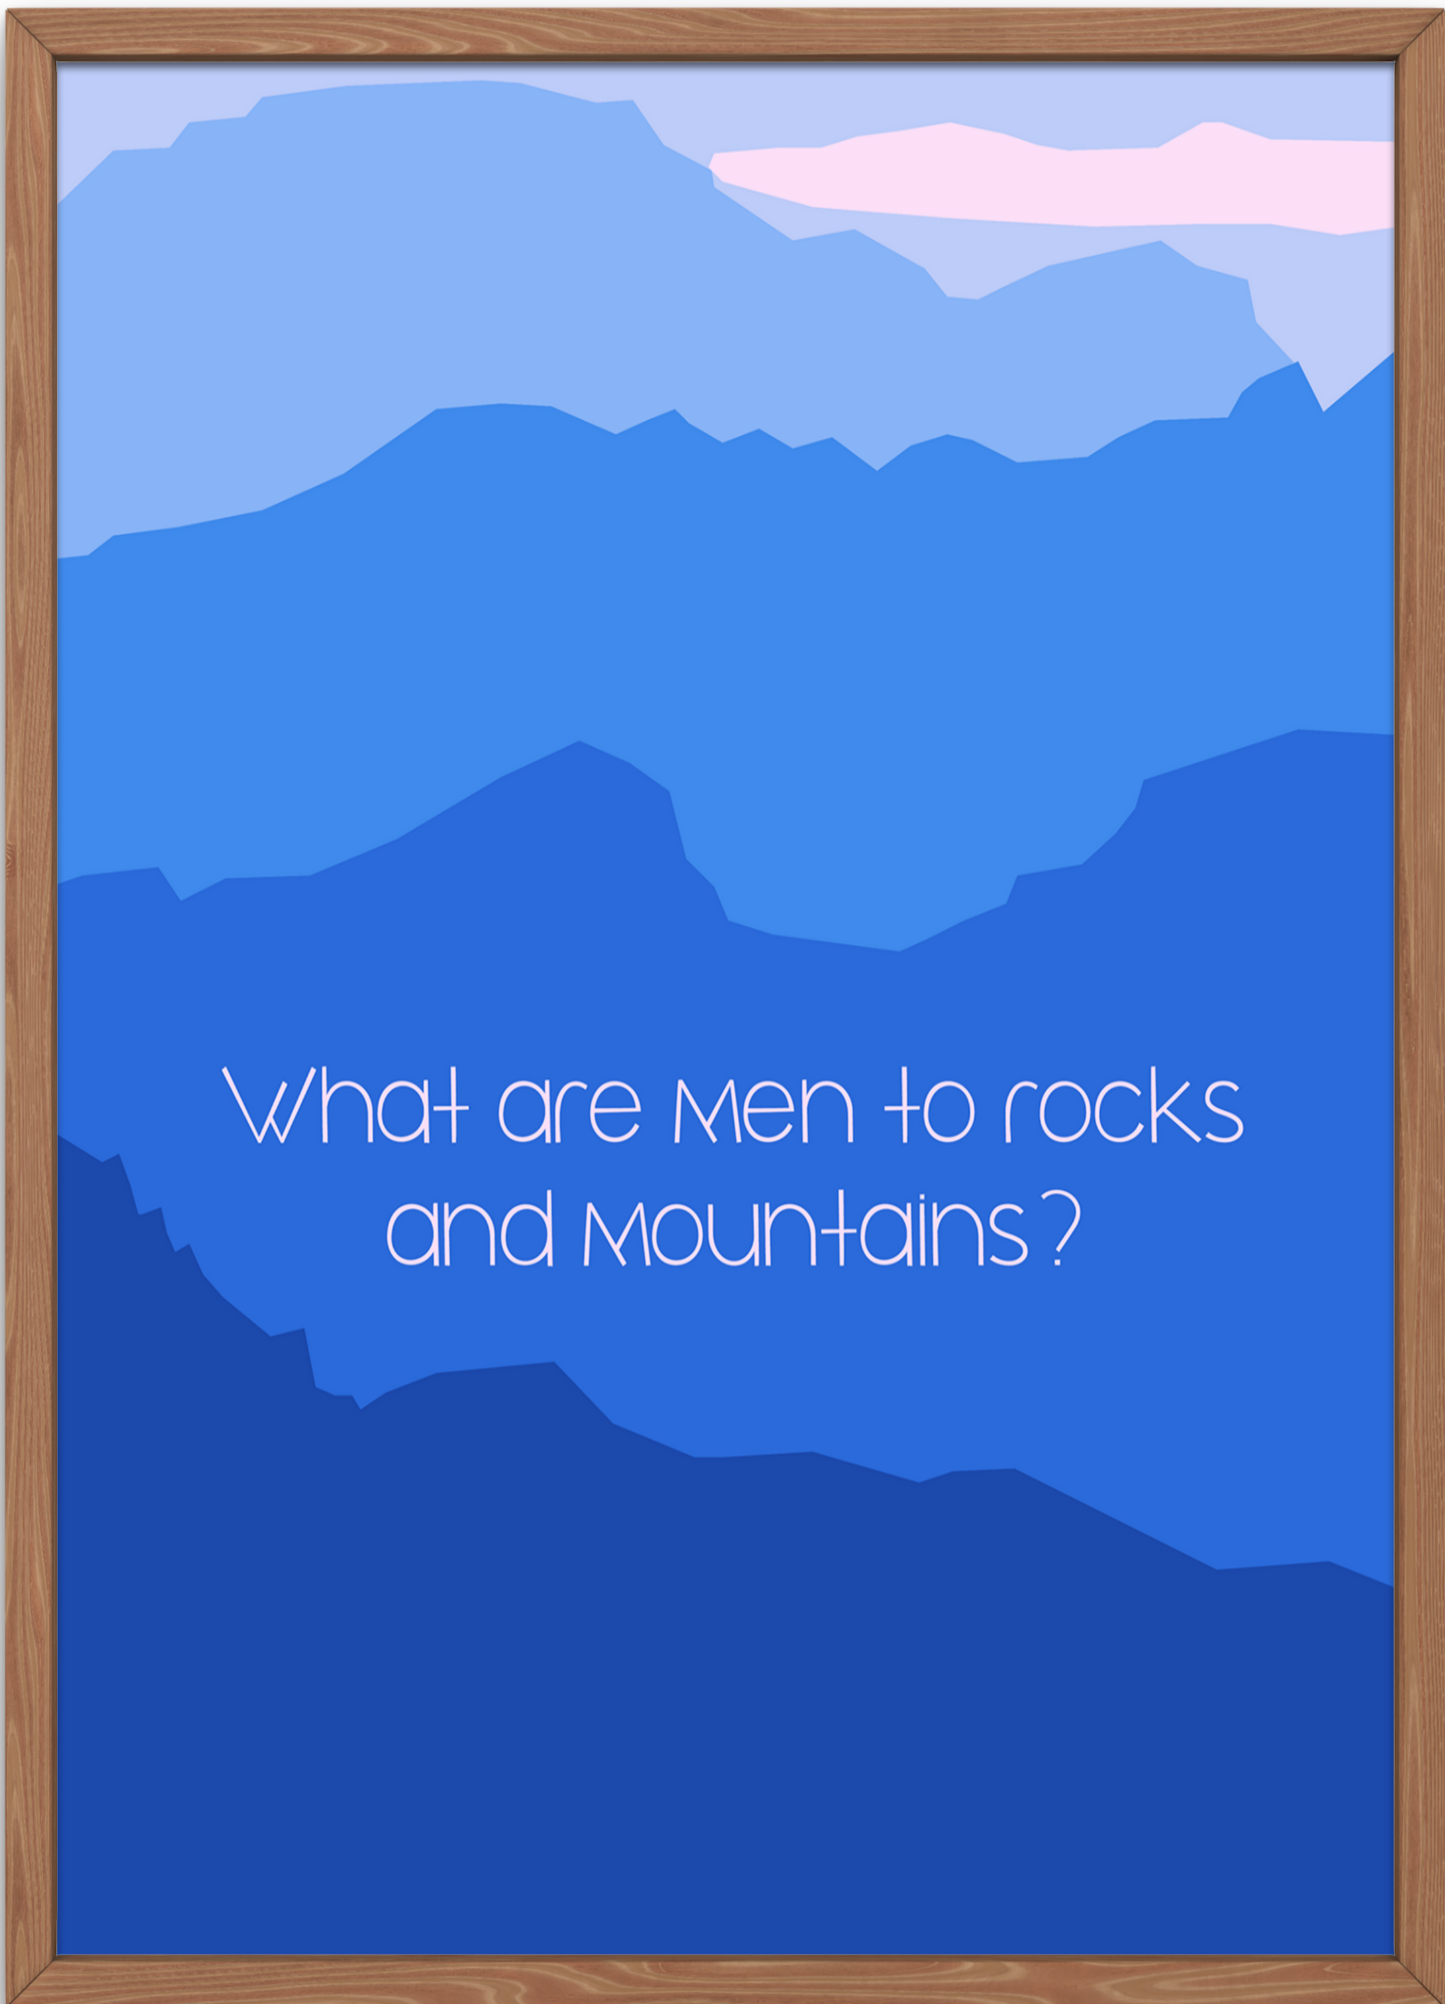 Jane Austen's Pride and Prejudice Quote "What are men compared to rocks and mountains?"